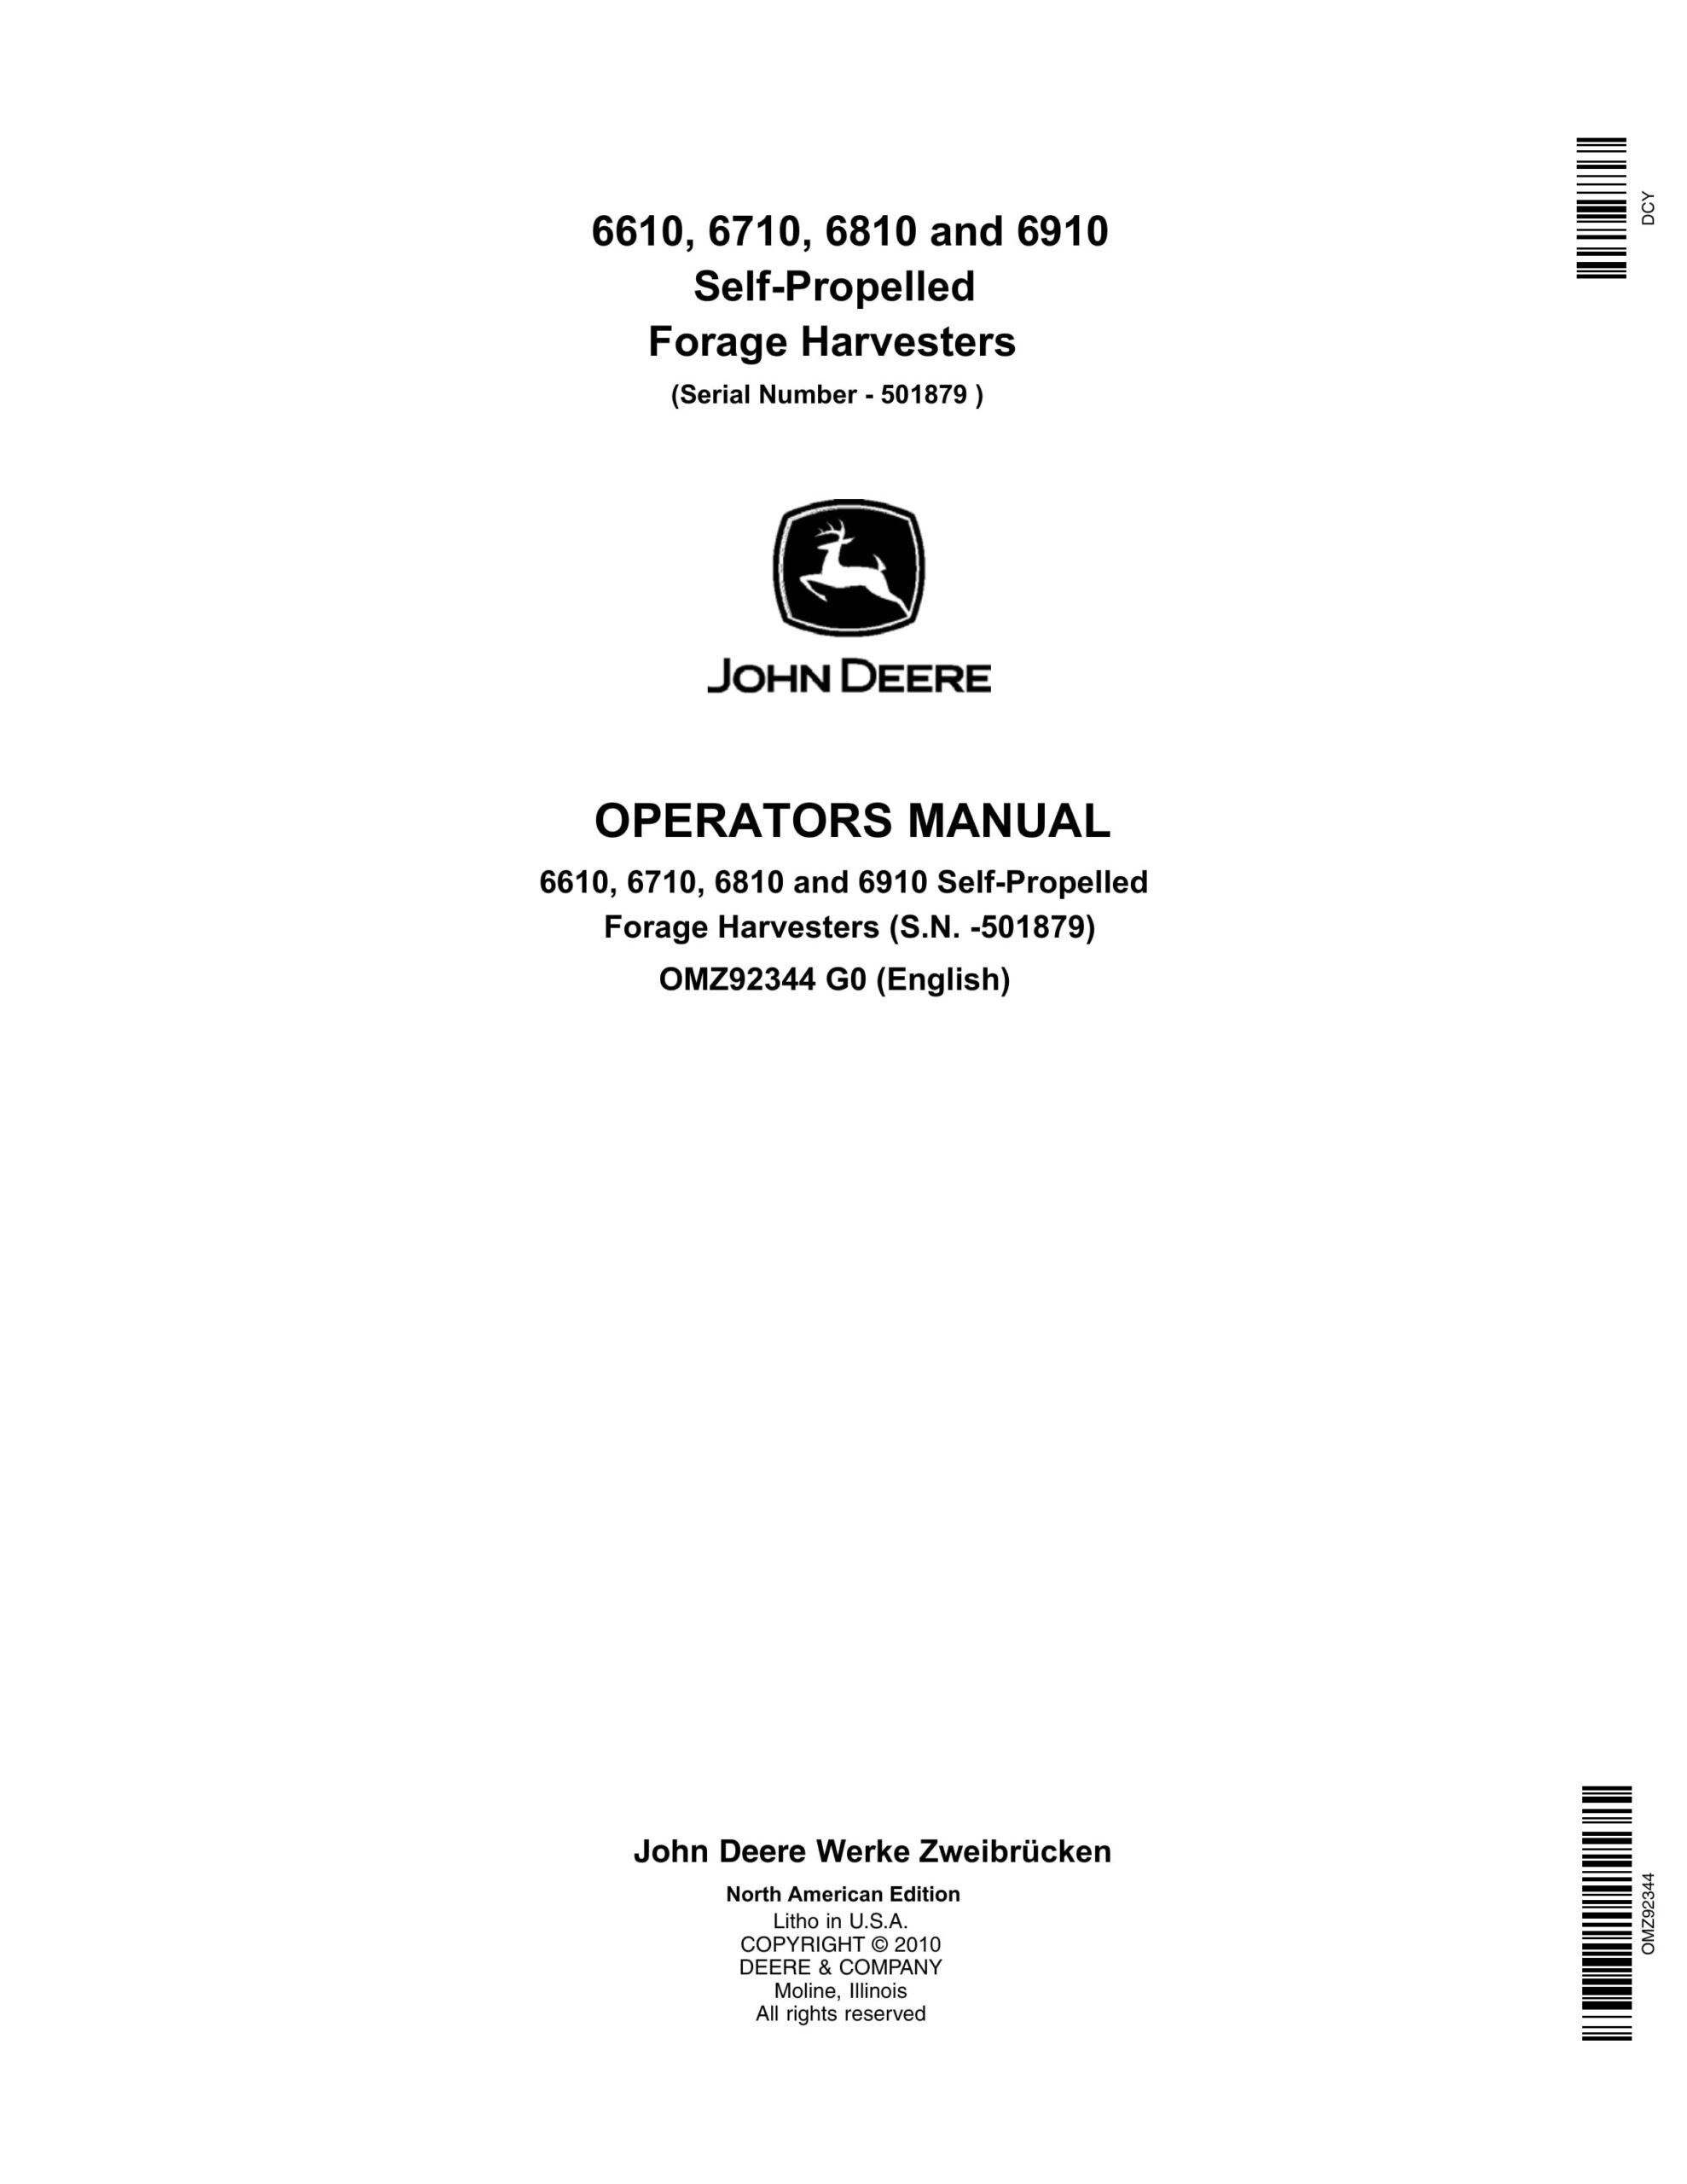 John Deere 6610, 6710, 6810 and 6910 Self-Propelled Forage Harvesters Operator Manual OMZ92344-1